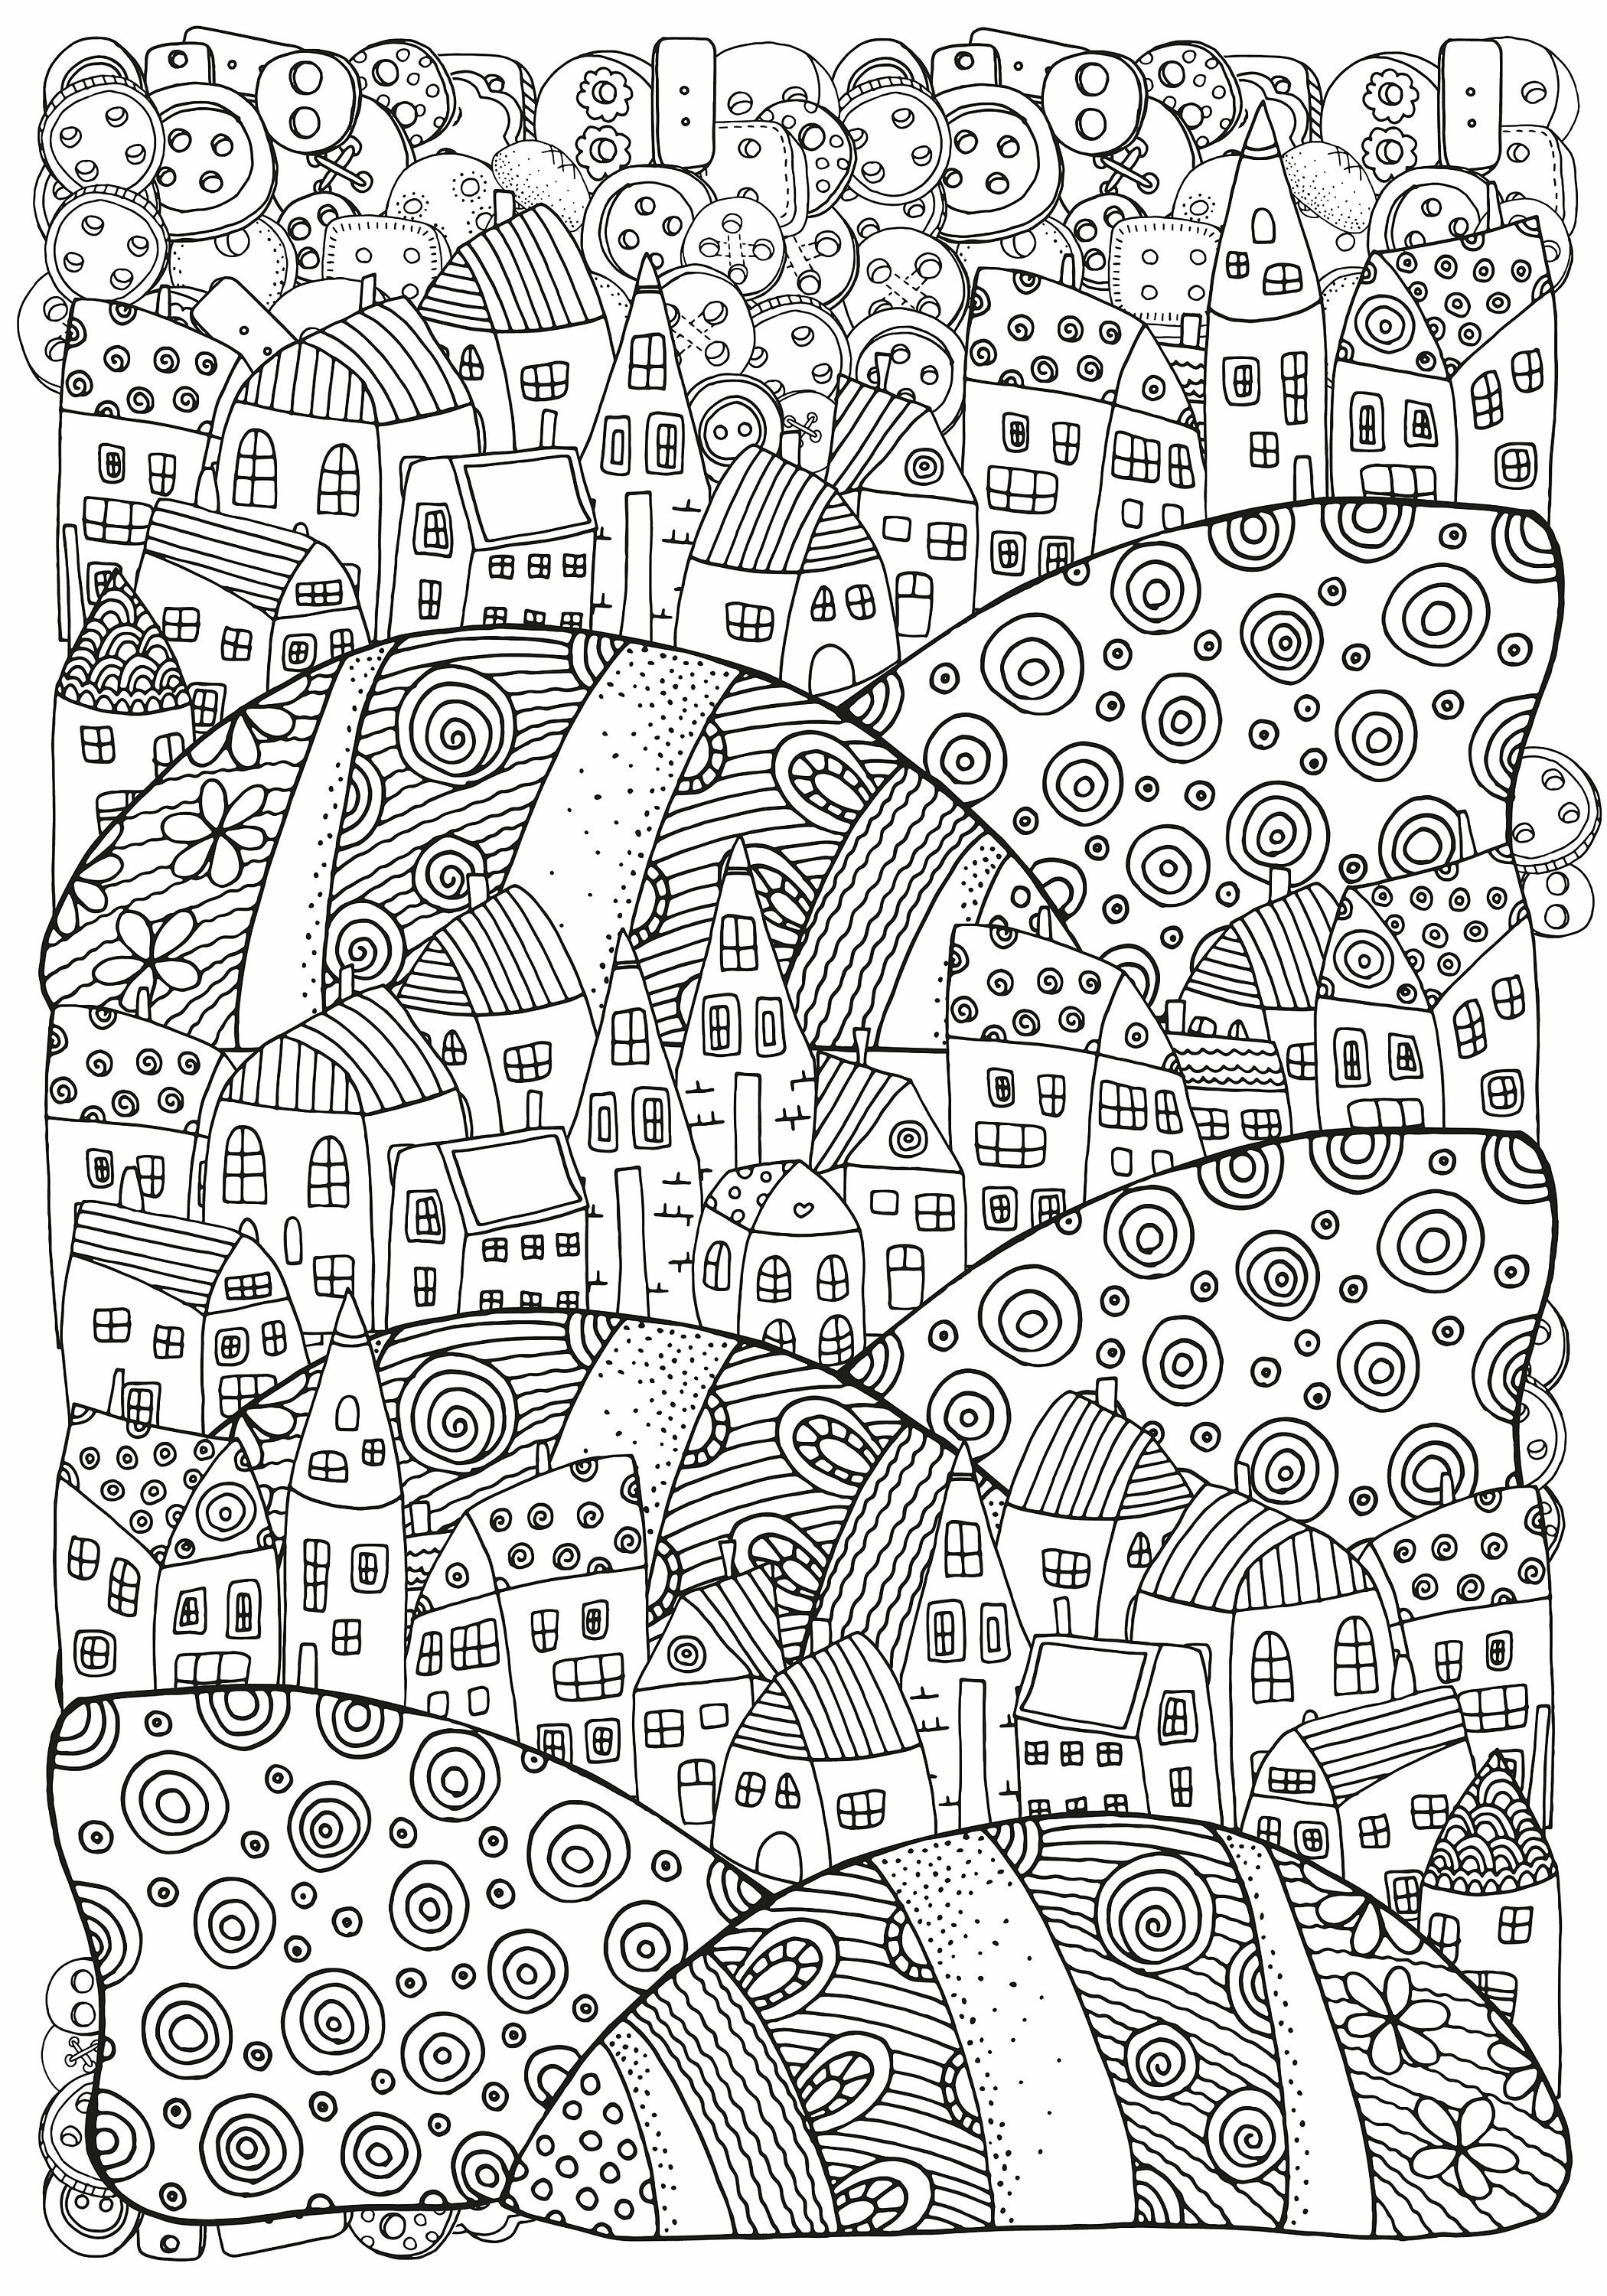 Butterfly Coloring Pages - Zentangle Adult Coloring Books — Bessie